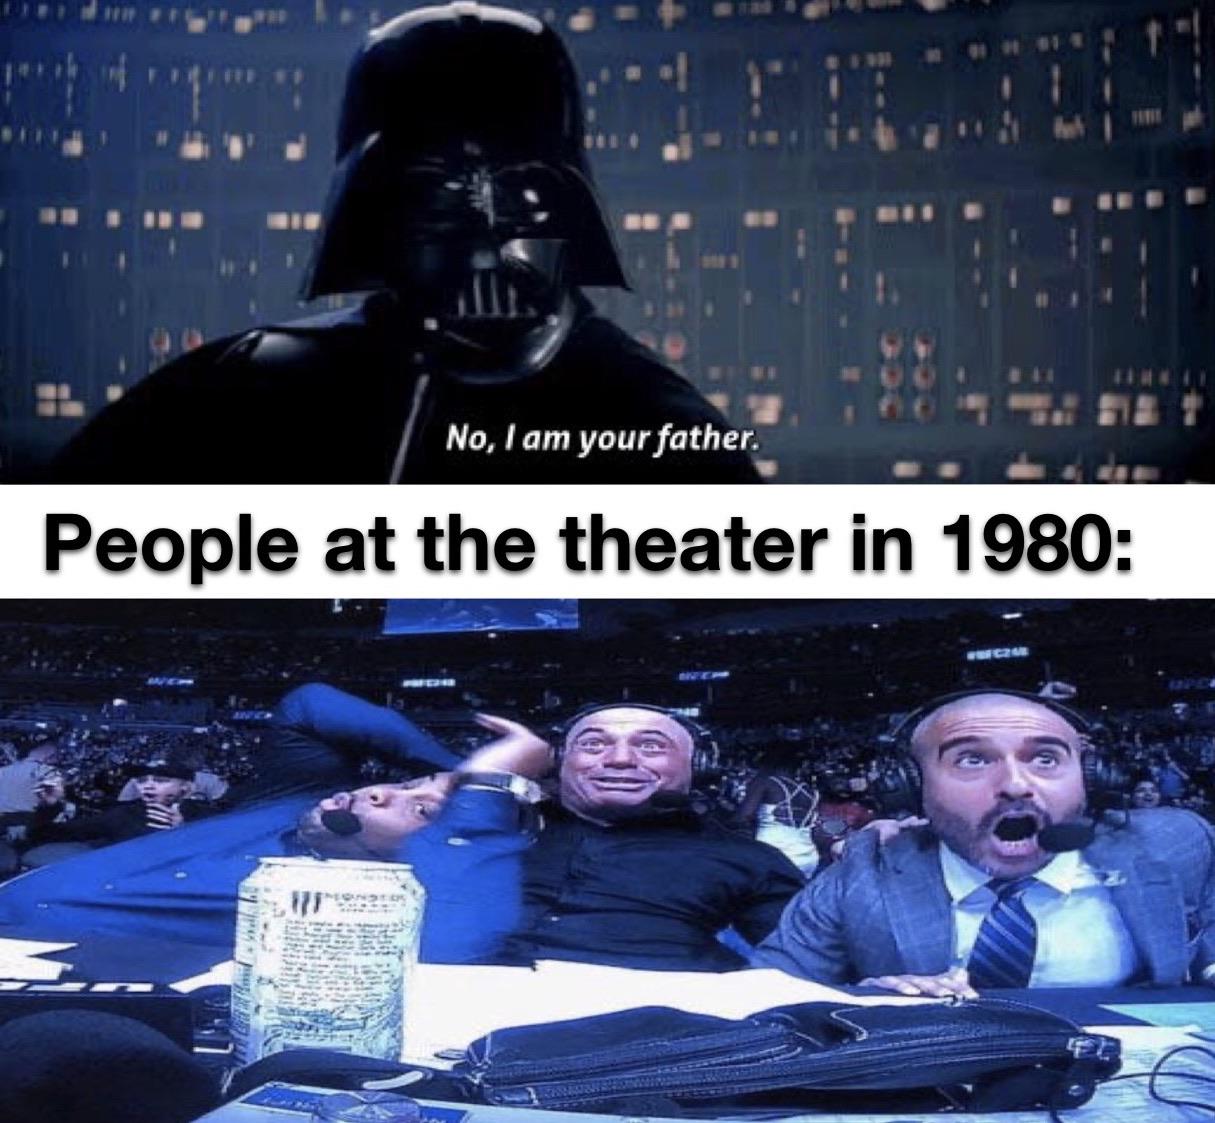 Ot-memes, Luke, Vader, Darth Vader, ZLyh0, ZCo Star Wars Memes Ot-memes, Luke, Vader, Darth Vader, ZLyh0, ZCo text: No, I am your father. People at the theater in 1980: 